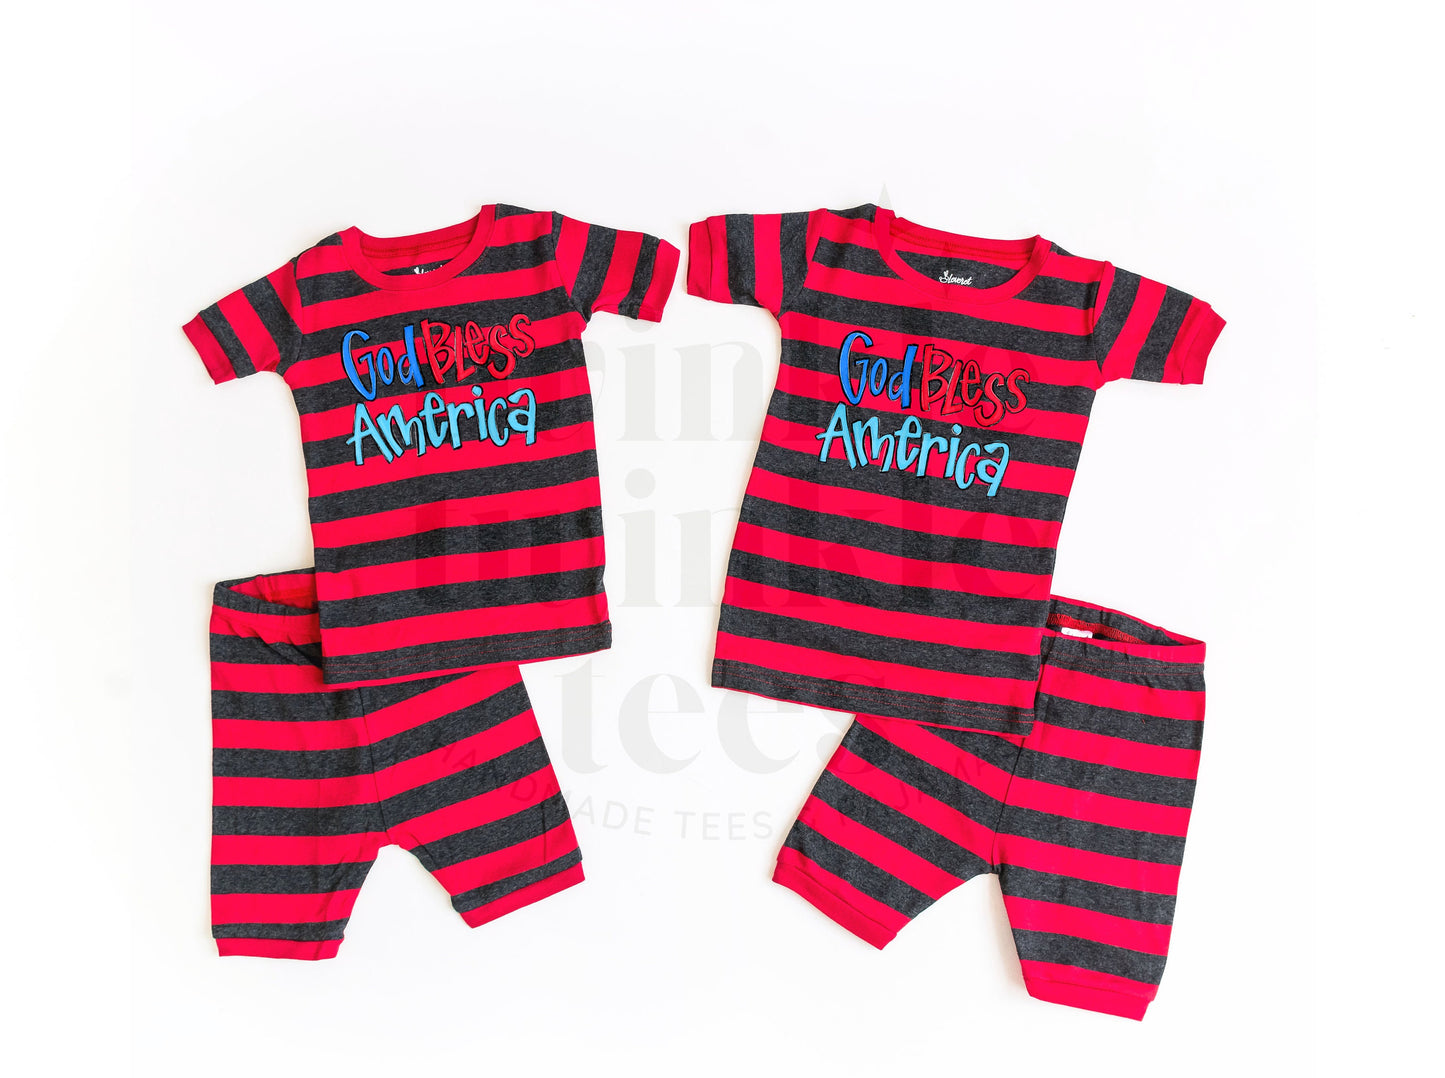 God Bless America Red Striped Shorts Set for Kids - Kids 4th of July Set - 4th of July Toddler Shirt and Shorts